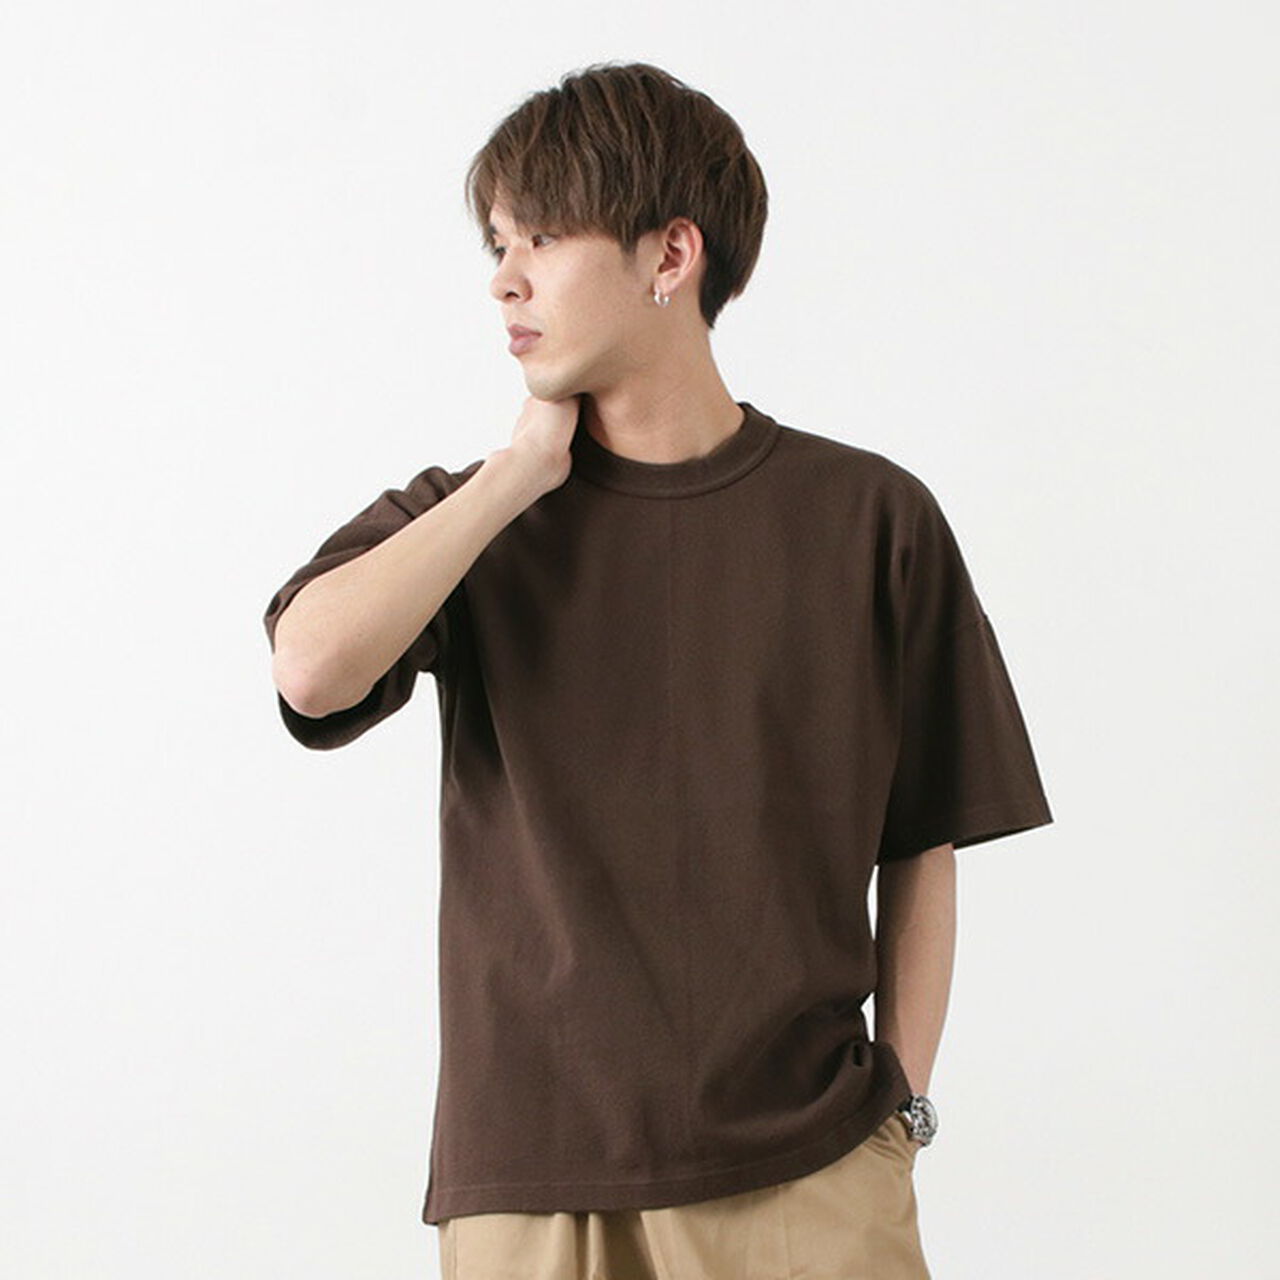 GT II Max Weight Short Sleeve,Brown, large image number 0